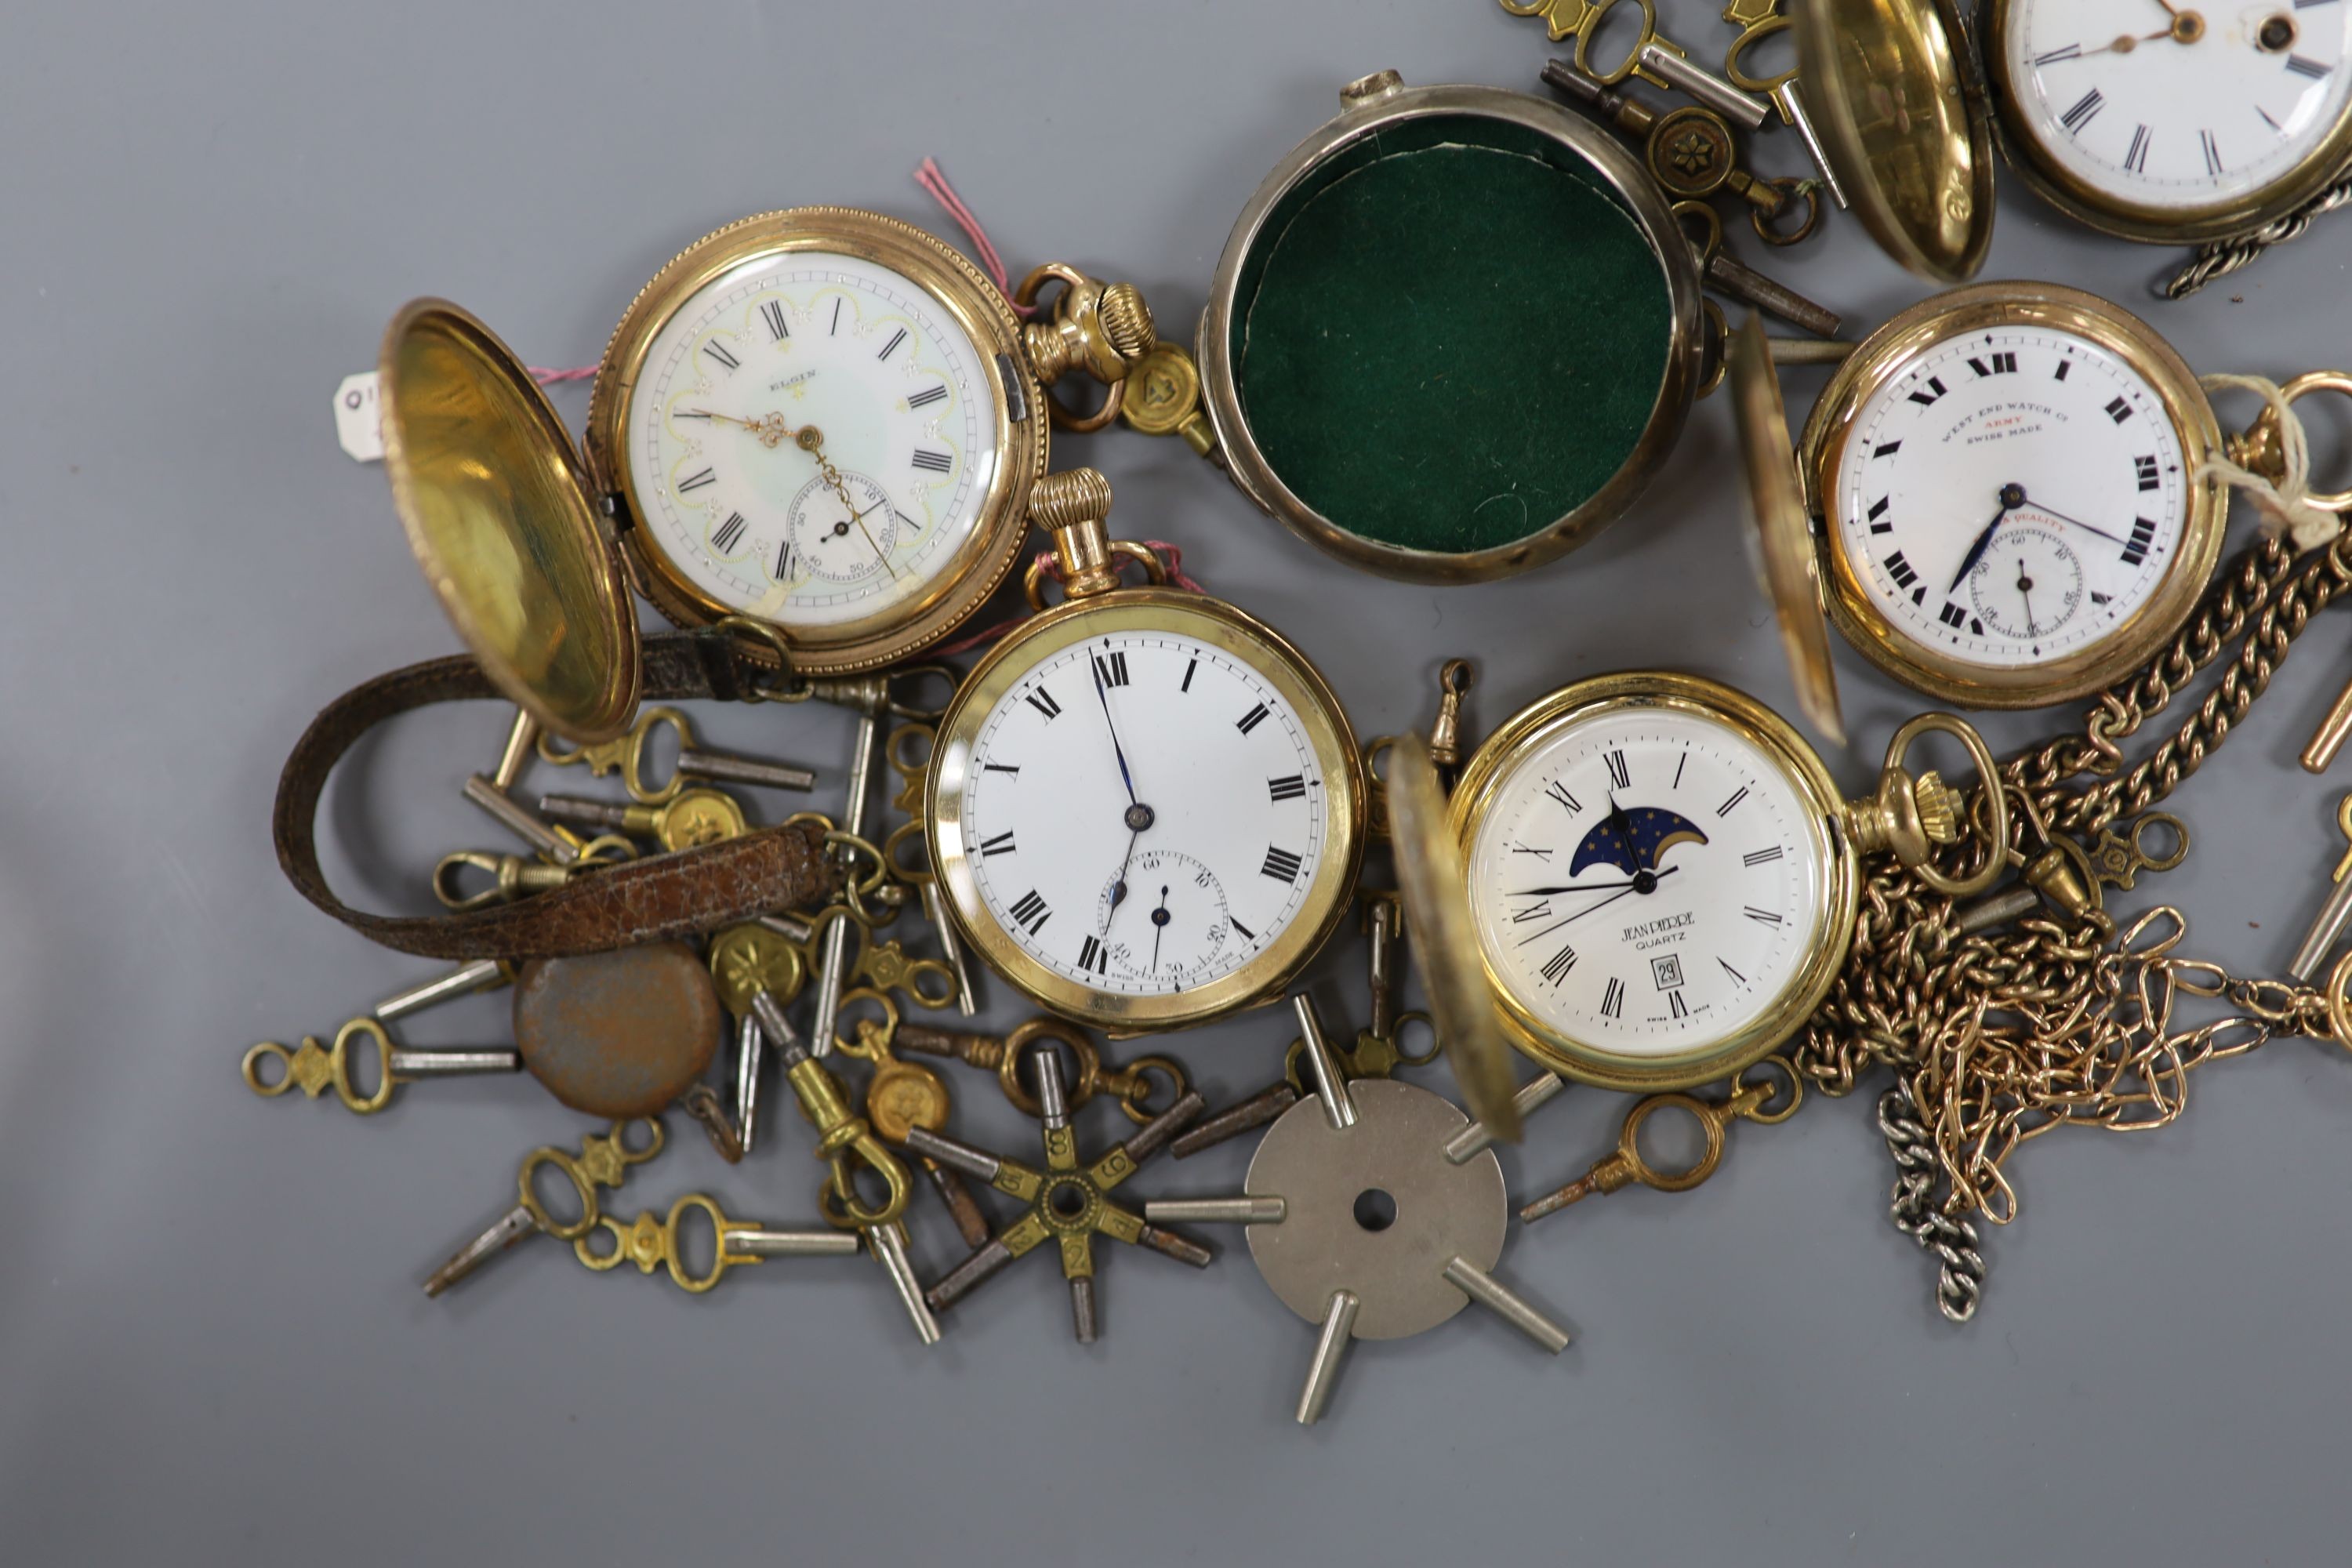 An early 20th century gold plated keyless pocket watch, a gold plated half hunter, three other pocket watches and watch accessories, including keys.